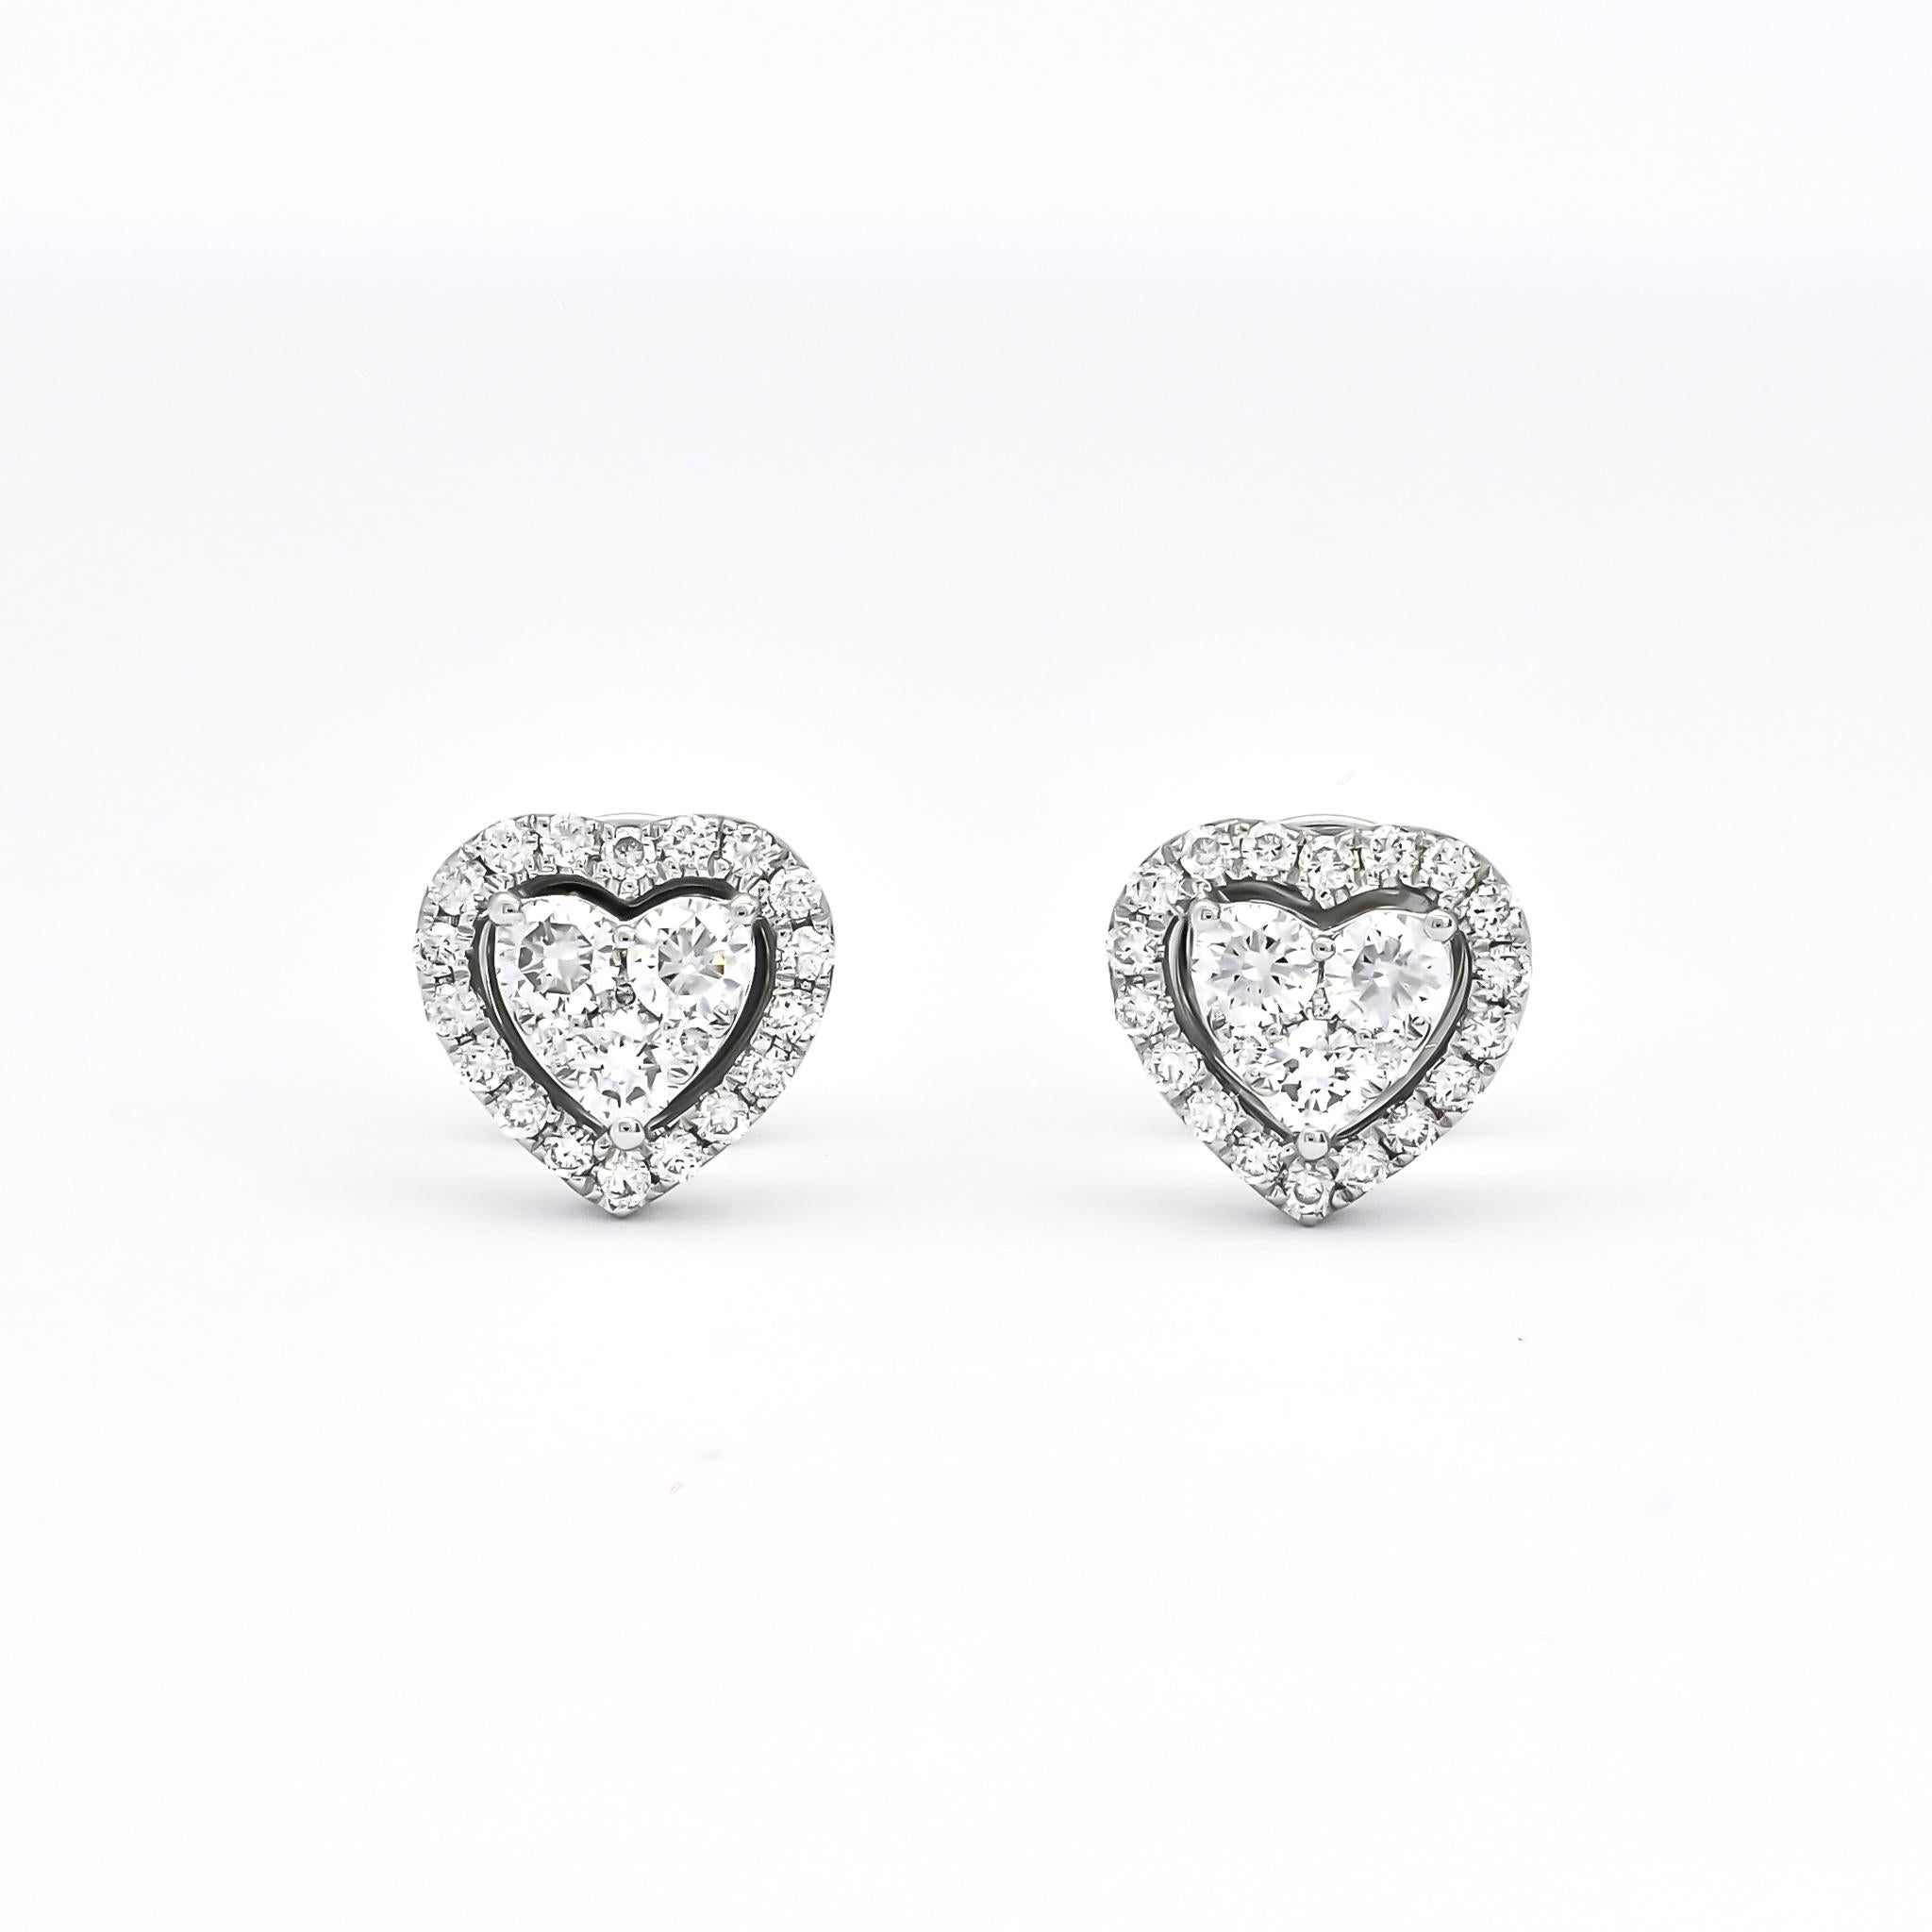 These 18KT white gold heart-shaped cluster diamond with halo stud earrings are a dazzling pair of earrings that are perfect for any occasion. Each earring features a heart-shaped cluster of high-quality diamonds that are set in a halo of smaller